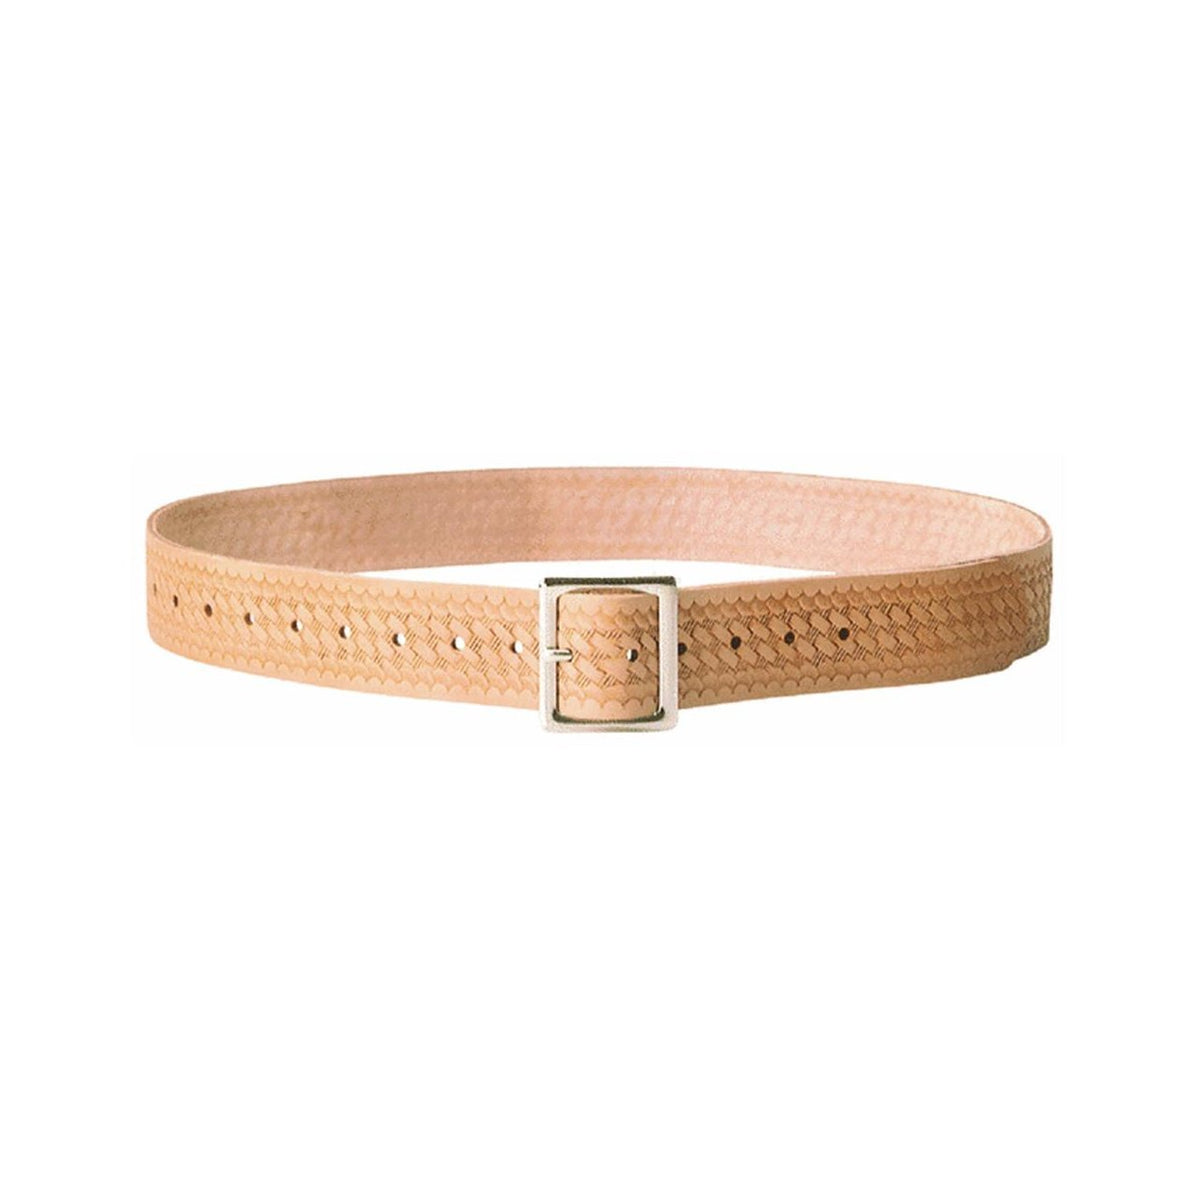 CLC E4501 Embossed Leather Work Belt, 1.75" W, Large